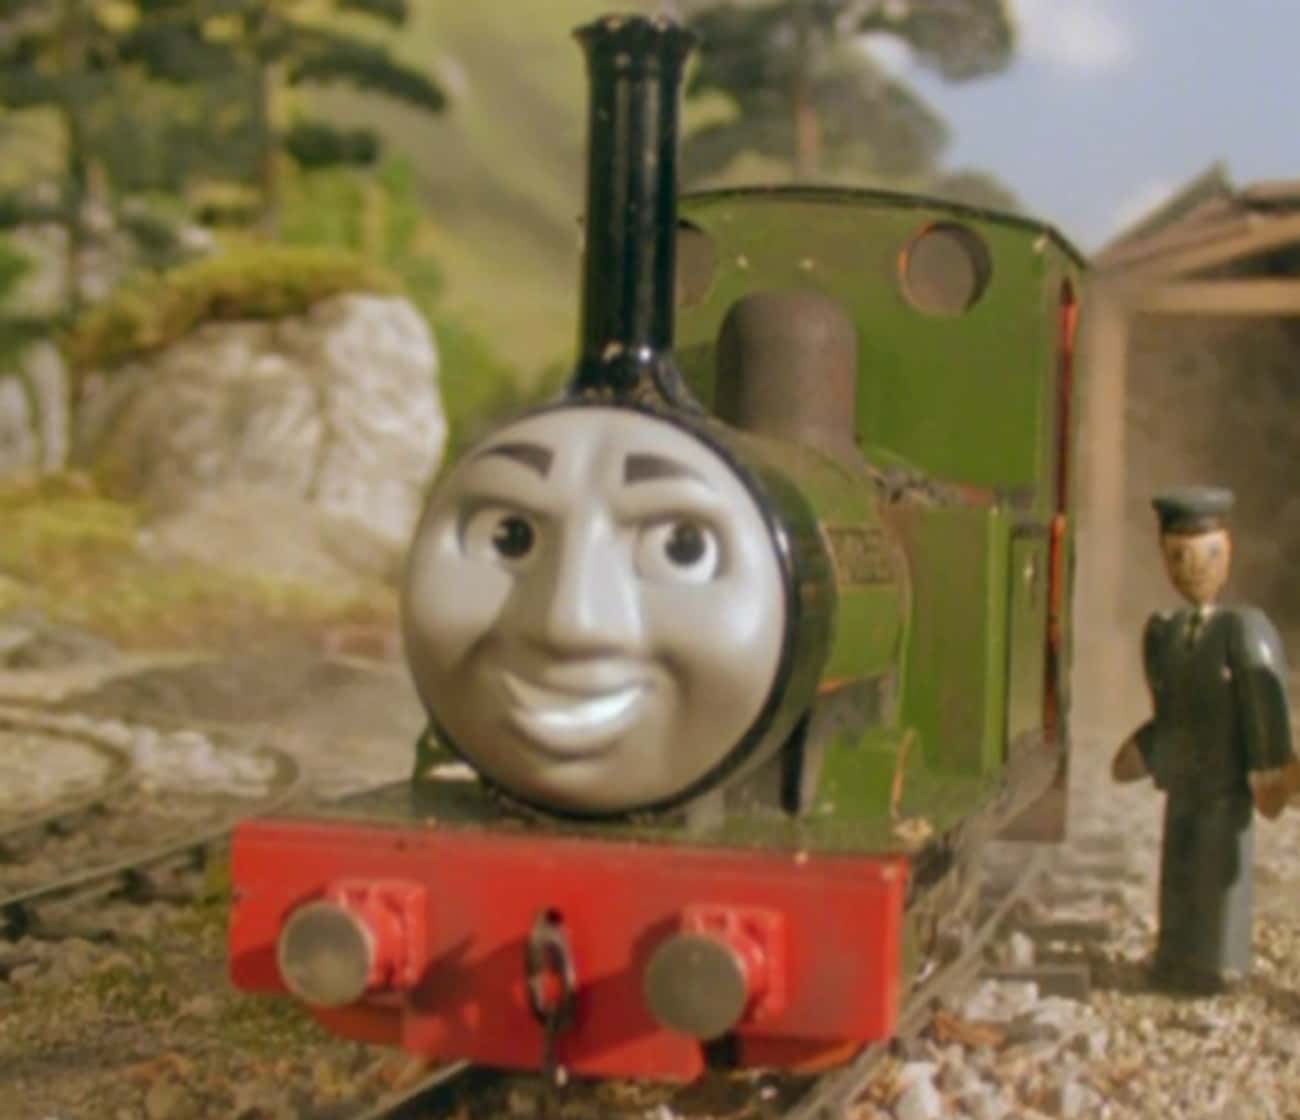 On Sodor, Characters Get Disciplined With Public Humiliation